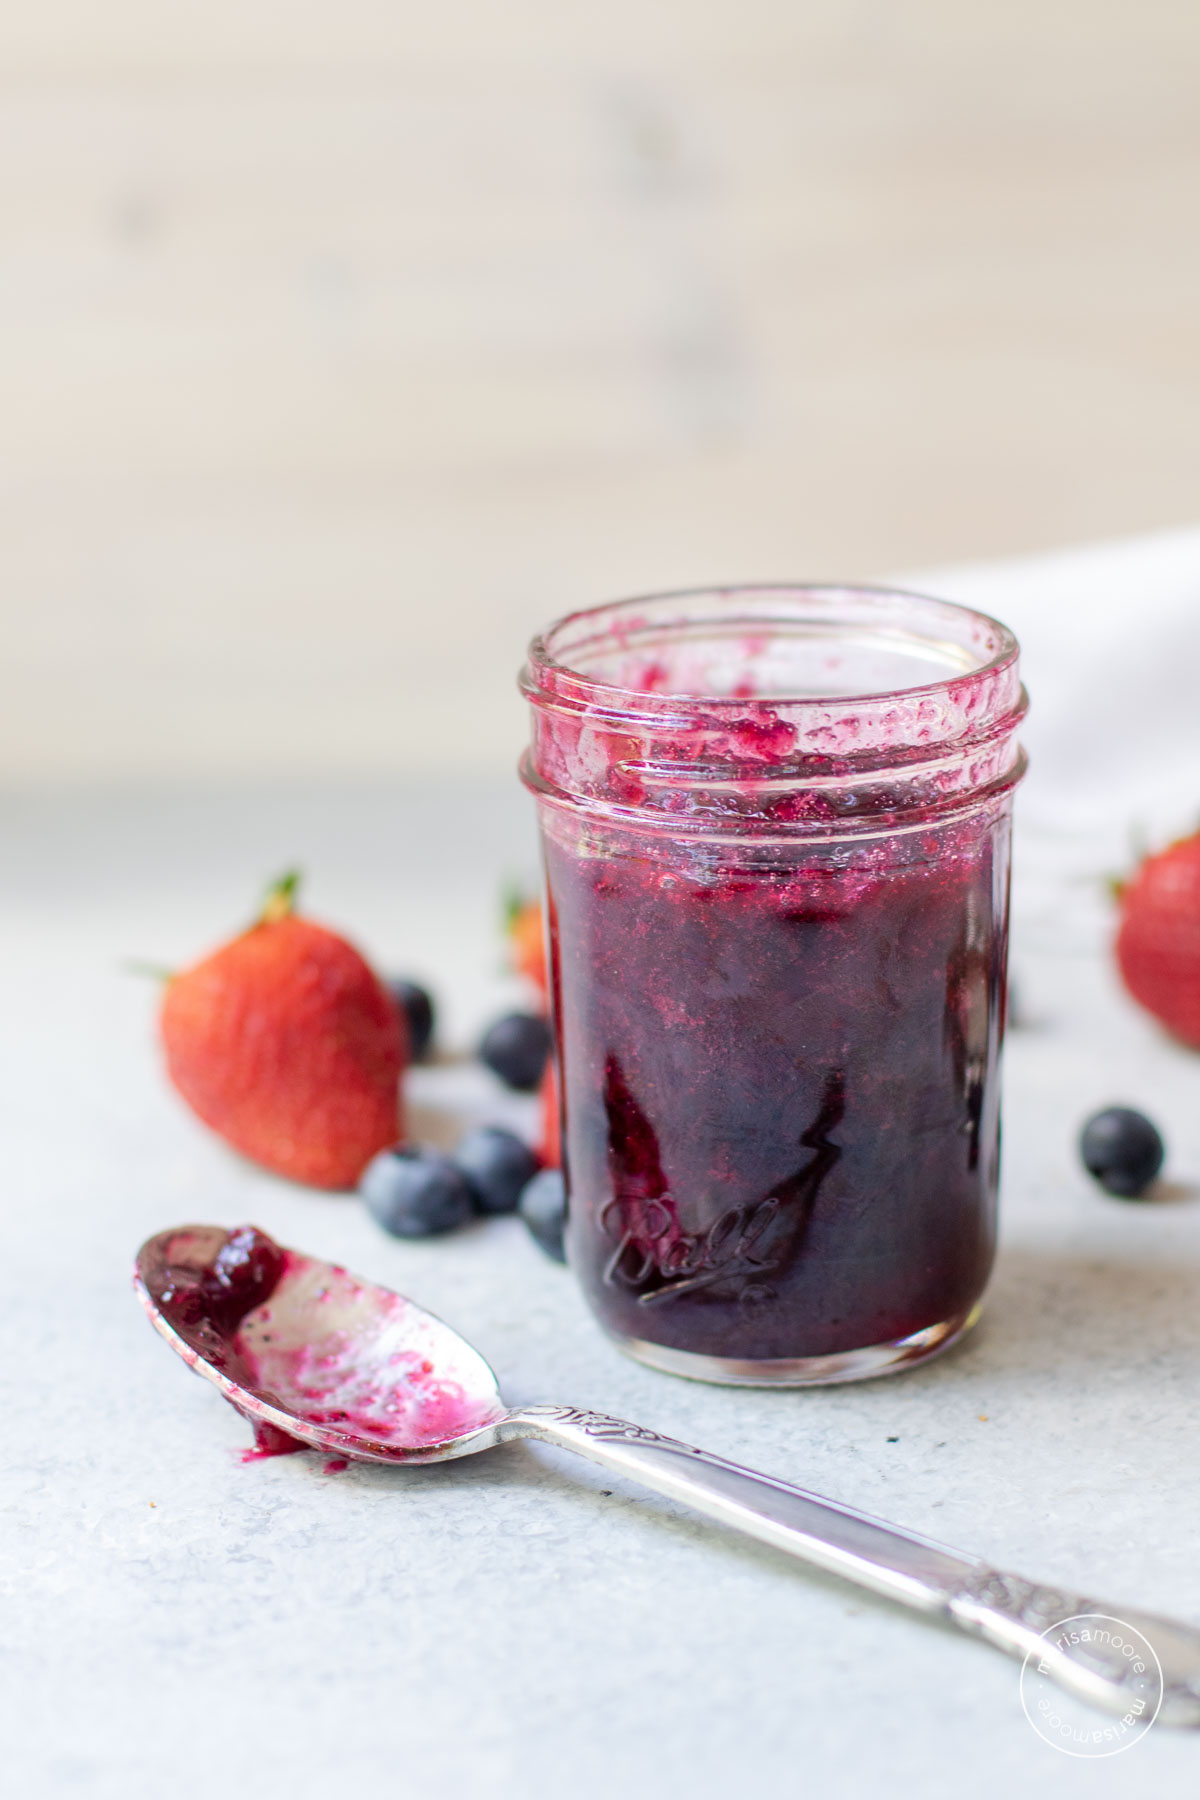 Jam in a jar with berries scattered and a spoon